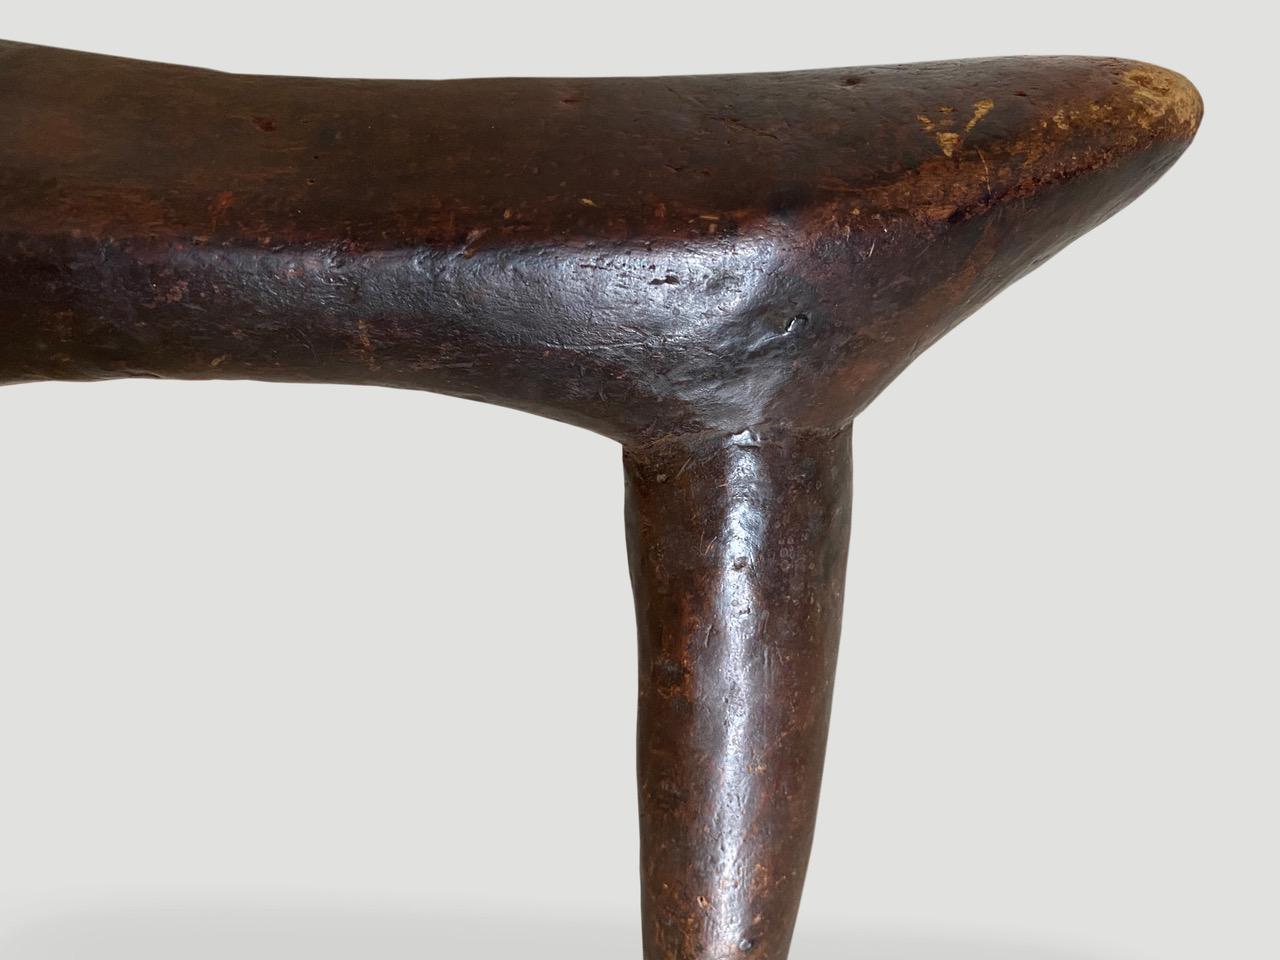 Beautiful museum quality, wooden head rest. Stunning patina on this rare piece of art from Sudan. Hand carved from a single piece of wood by the Dinka tribe. The leg extends to nine inches wide, circa 1900.

We only source the best.

This head